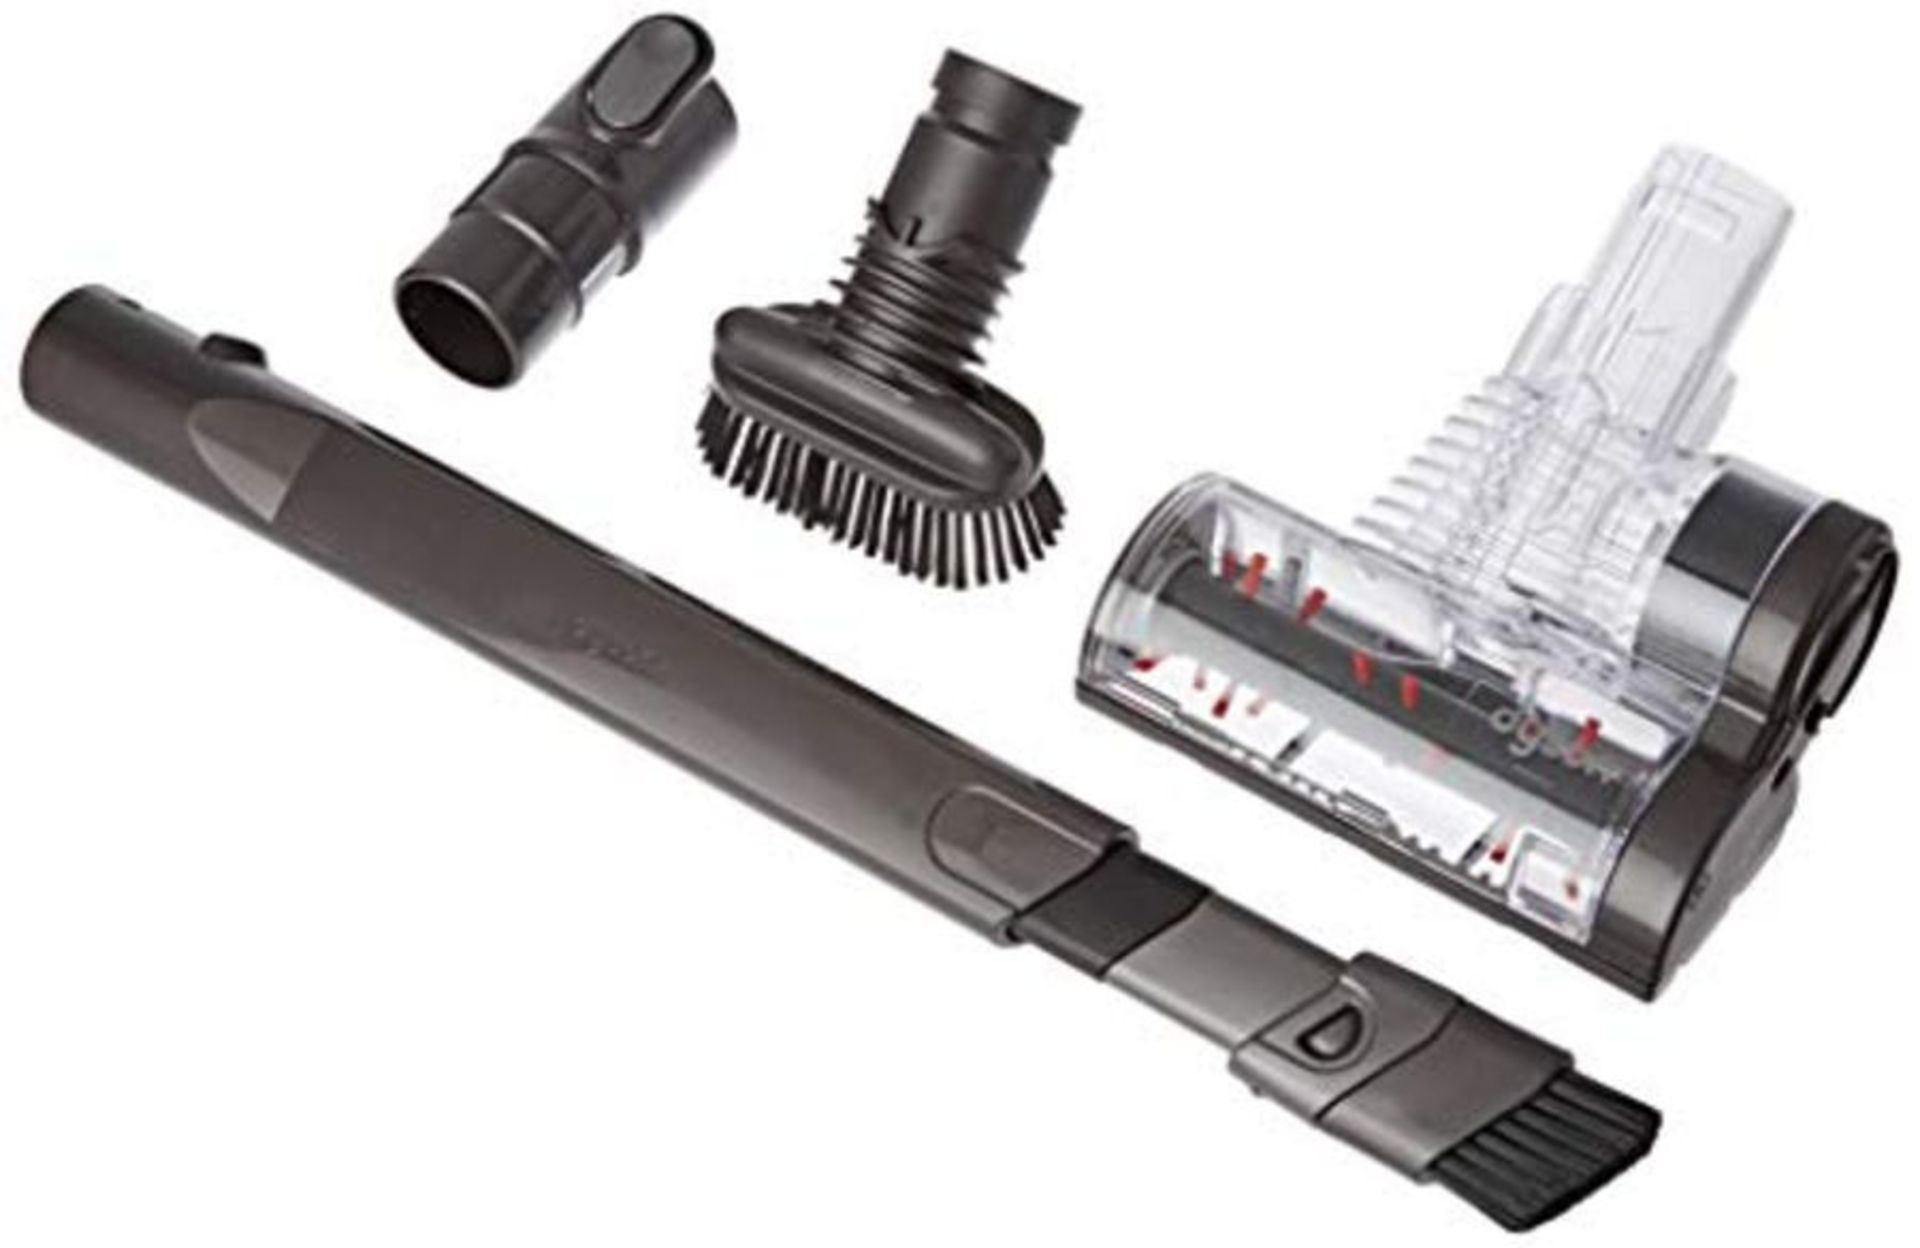 [INCOMPLETE] Dyson Car cleaning kit